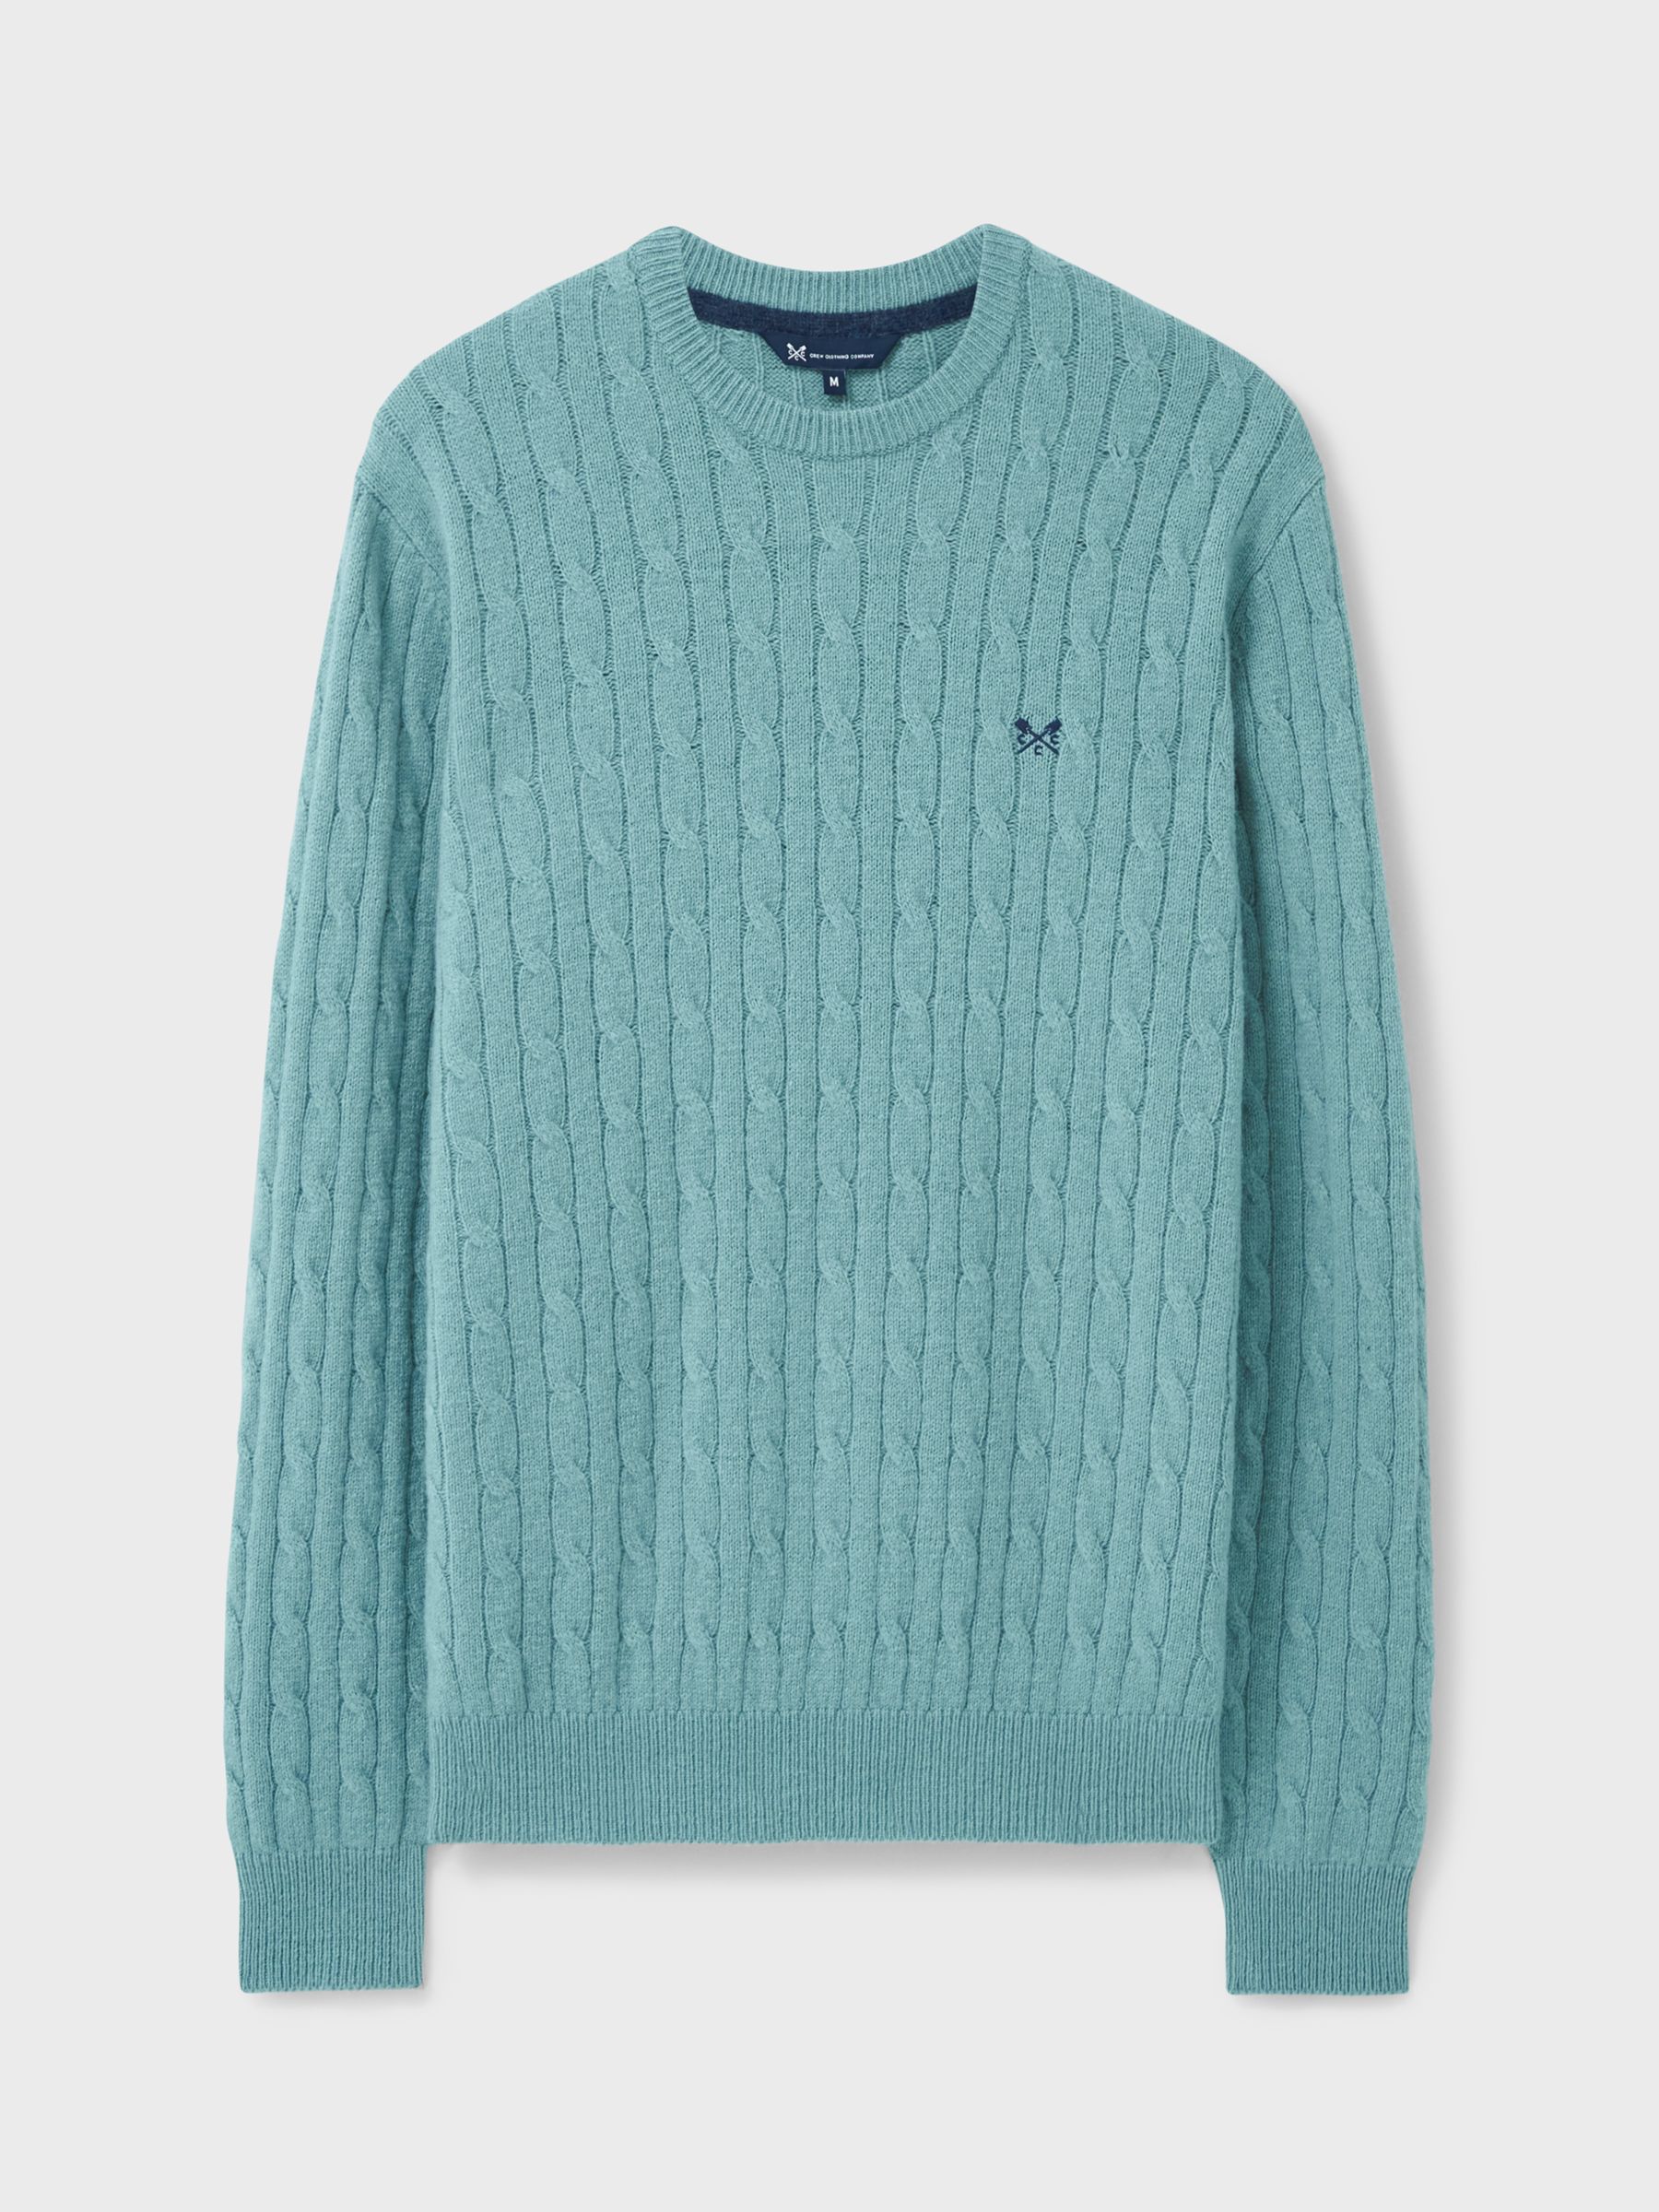 Buy Crew Clothing Lambswool Blend Cable Knit Crew Neck Jumper Online at johnlewis.com